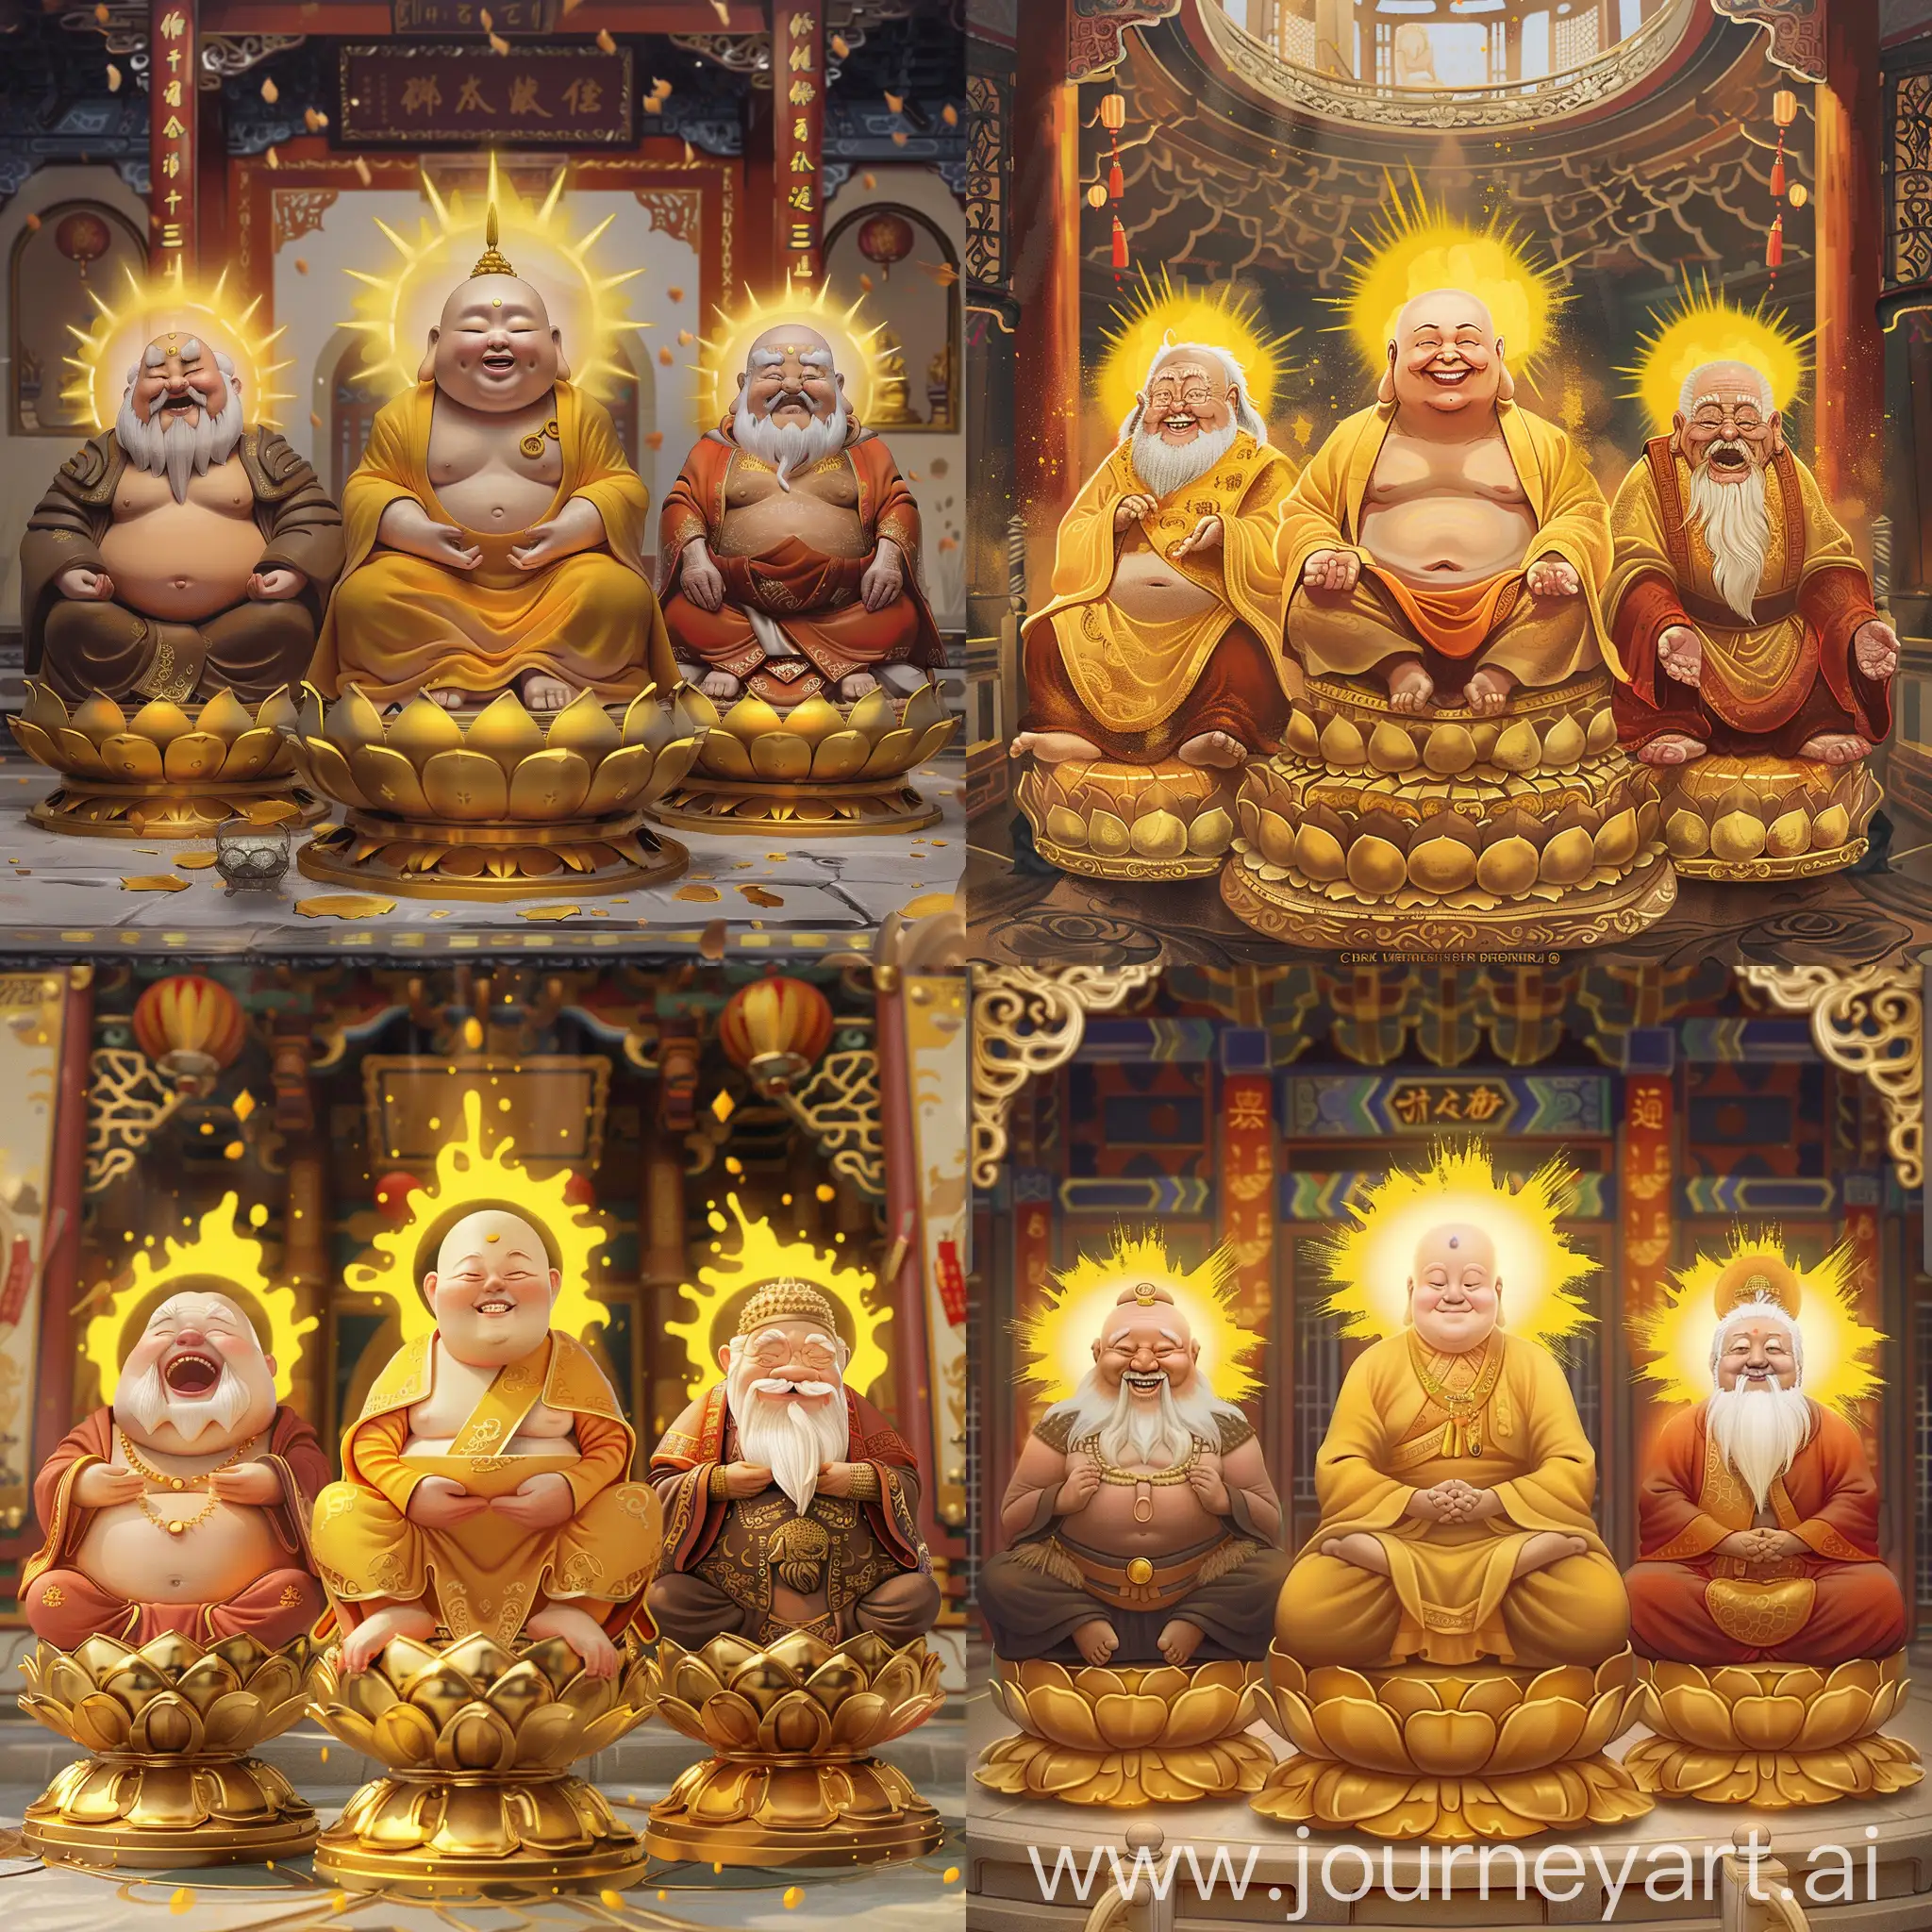 Chinesestyle-Buddhas-Meditating-in-a-Golden-Aura-within-a-Grand-Buddhist-Temple